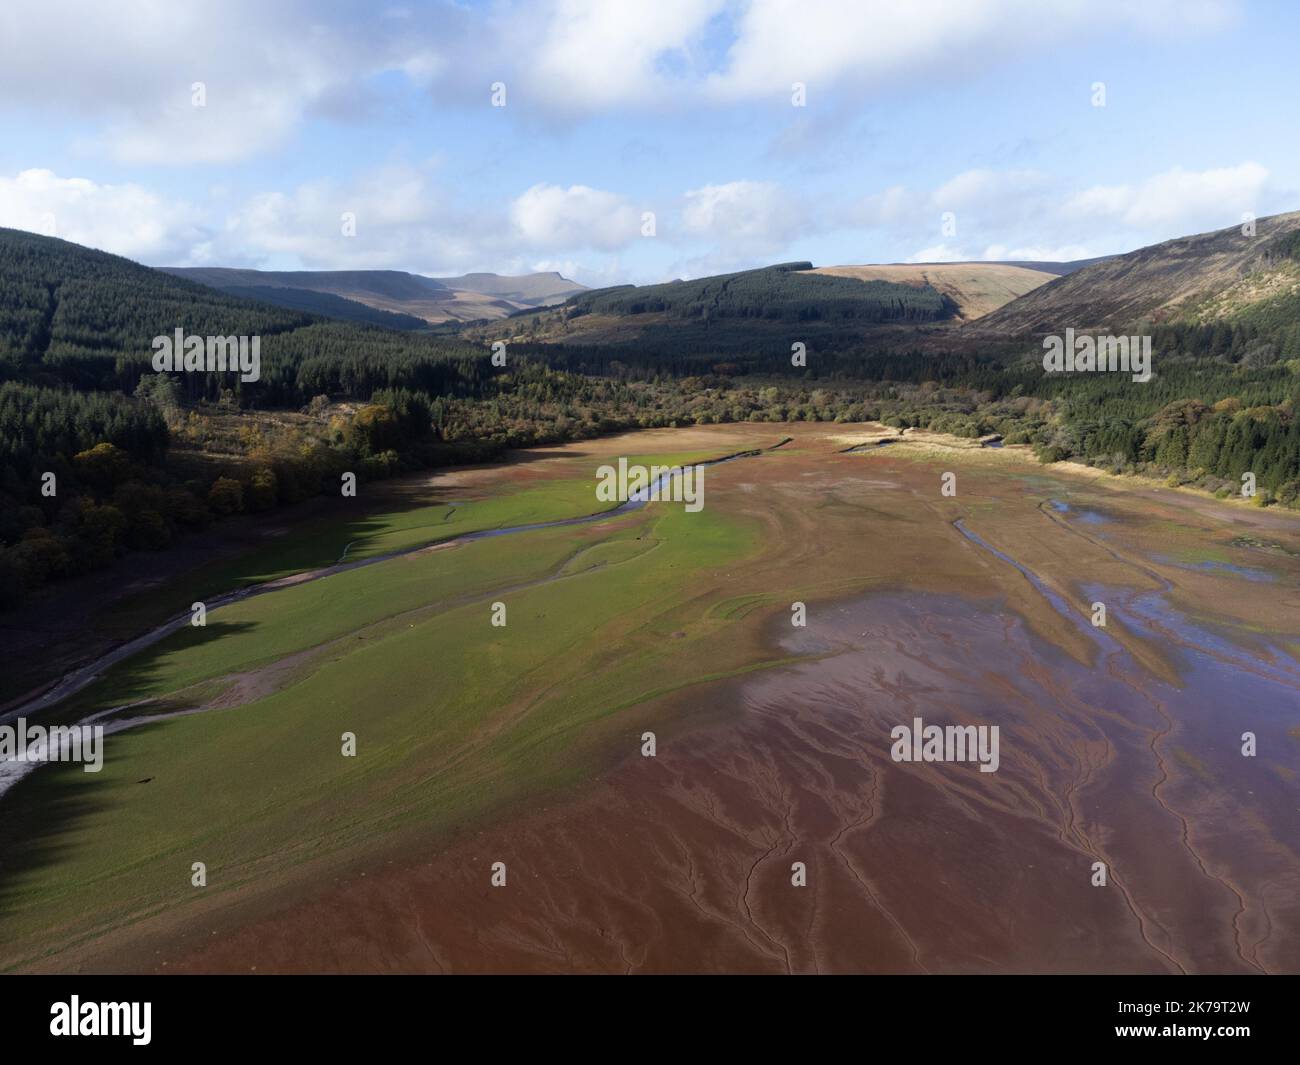 Pentwyn reservoir, Merthyr Tydfil, South Wales, UK.  17 October '22.  UK weather: A sunny afternoon at the reservoir.  Water levels have risen slightly following the summer heatwave.  Credit: Andrew Bartlett/Alamy Live News. Stock Photo